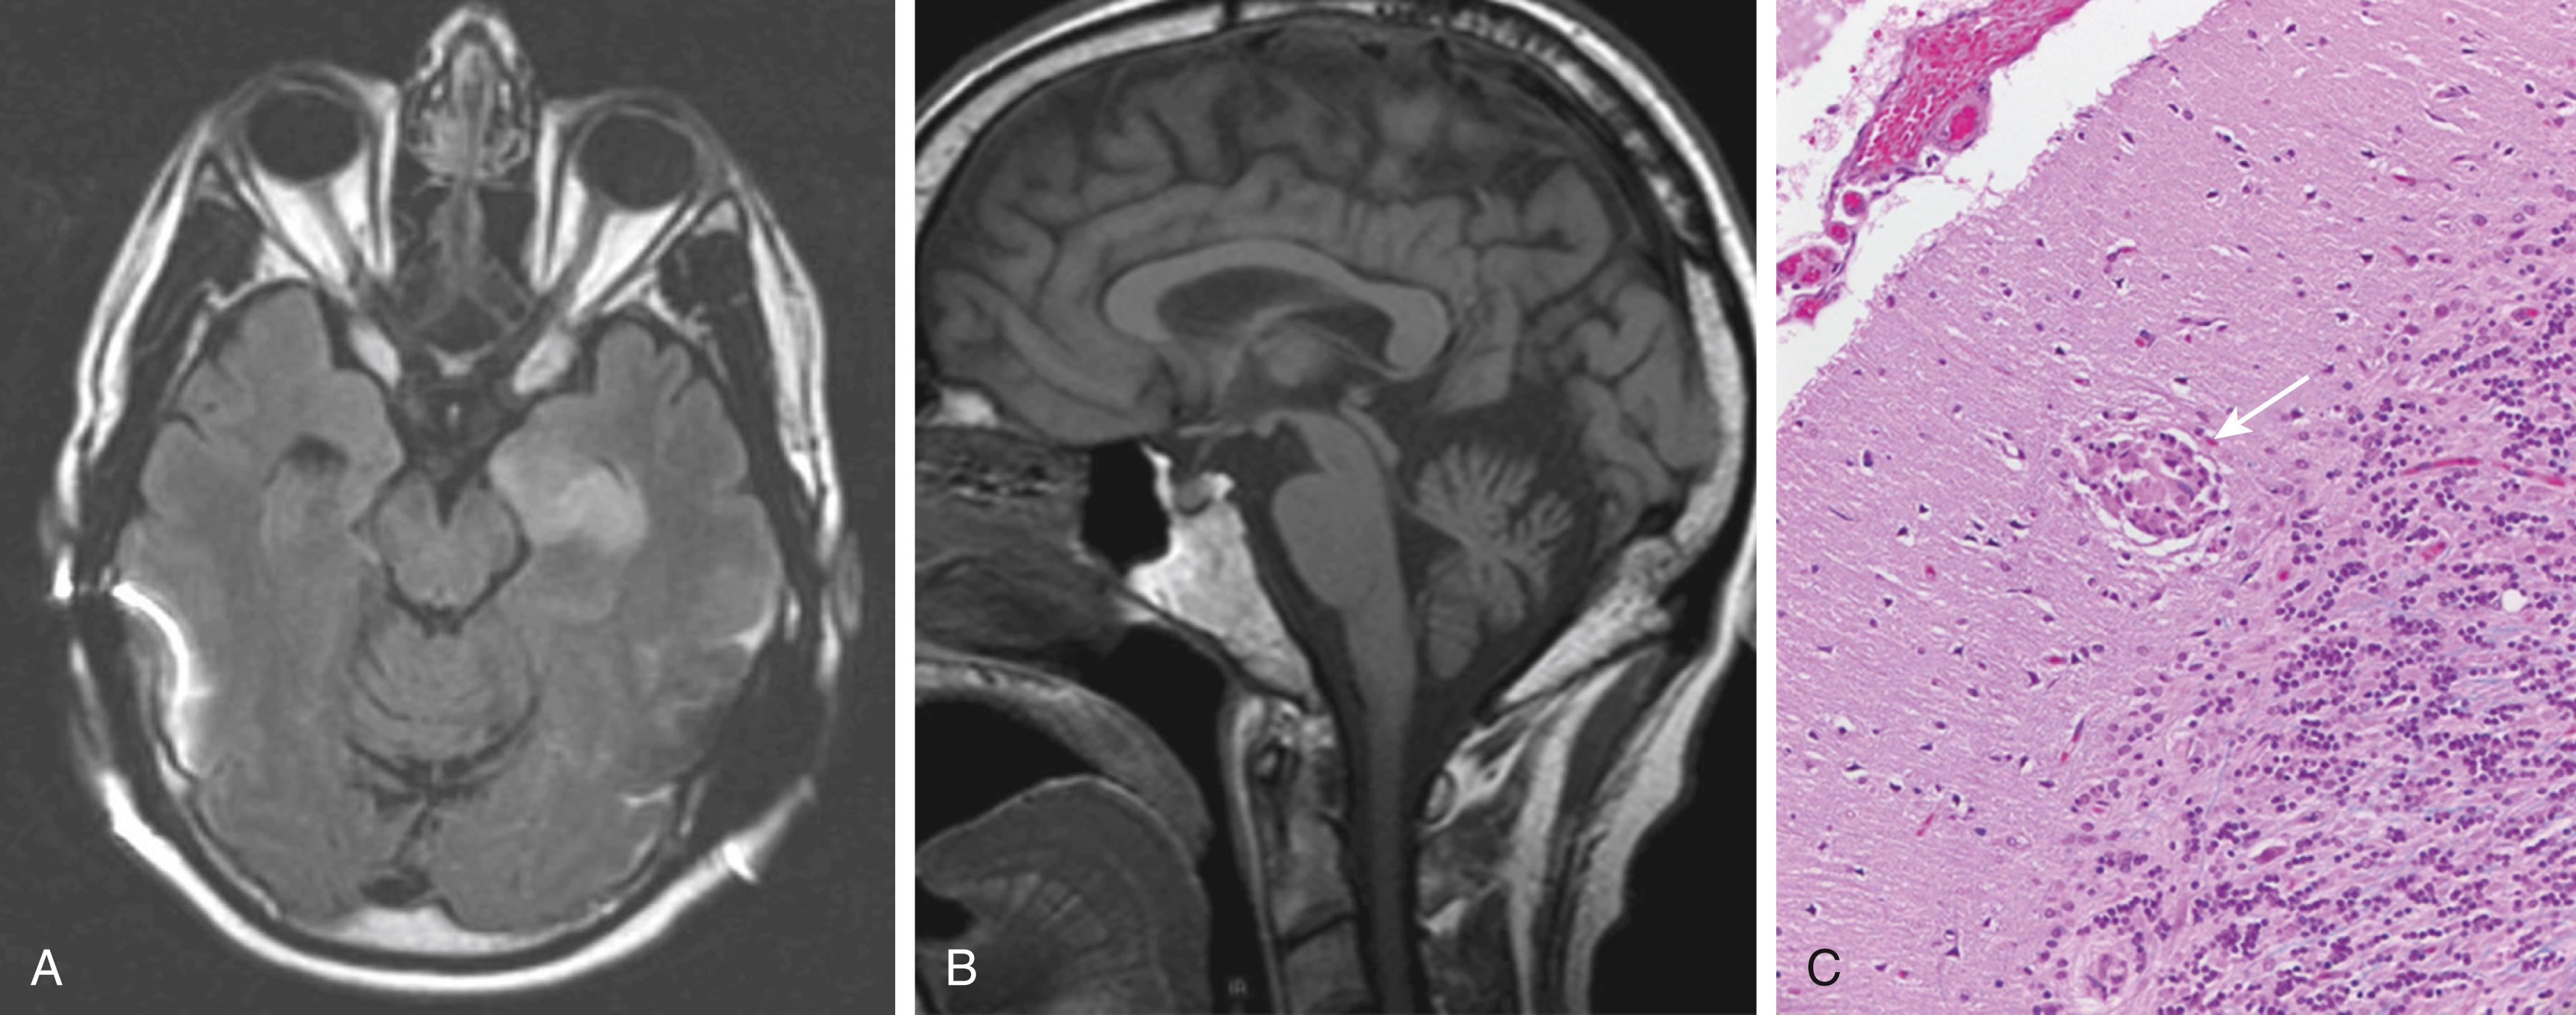 Fig. 23.4, A 51-year-old man with bilateral hearing loss and progressive ataxia. Brain magnetic resonance imaging (MRI) demonstrates hyperintensity in the left medial temporal region on an axial fluid-attenuated inversion recovery (FLAIR) sequence ( A ) and cerebellar atrophy on a sagittal T1 sequence ( B ). Postmortem examination shows the granuloma in the cerebellar cortex ( C ), confirming the diagnosis of neurosarcoidosis.